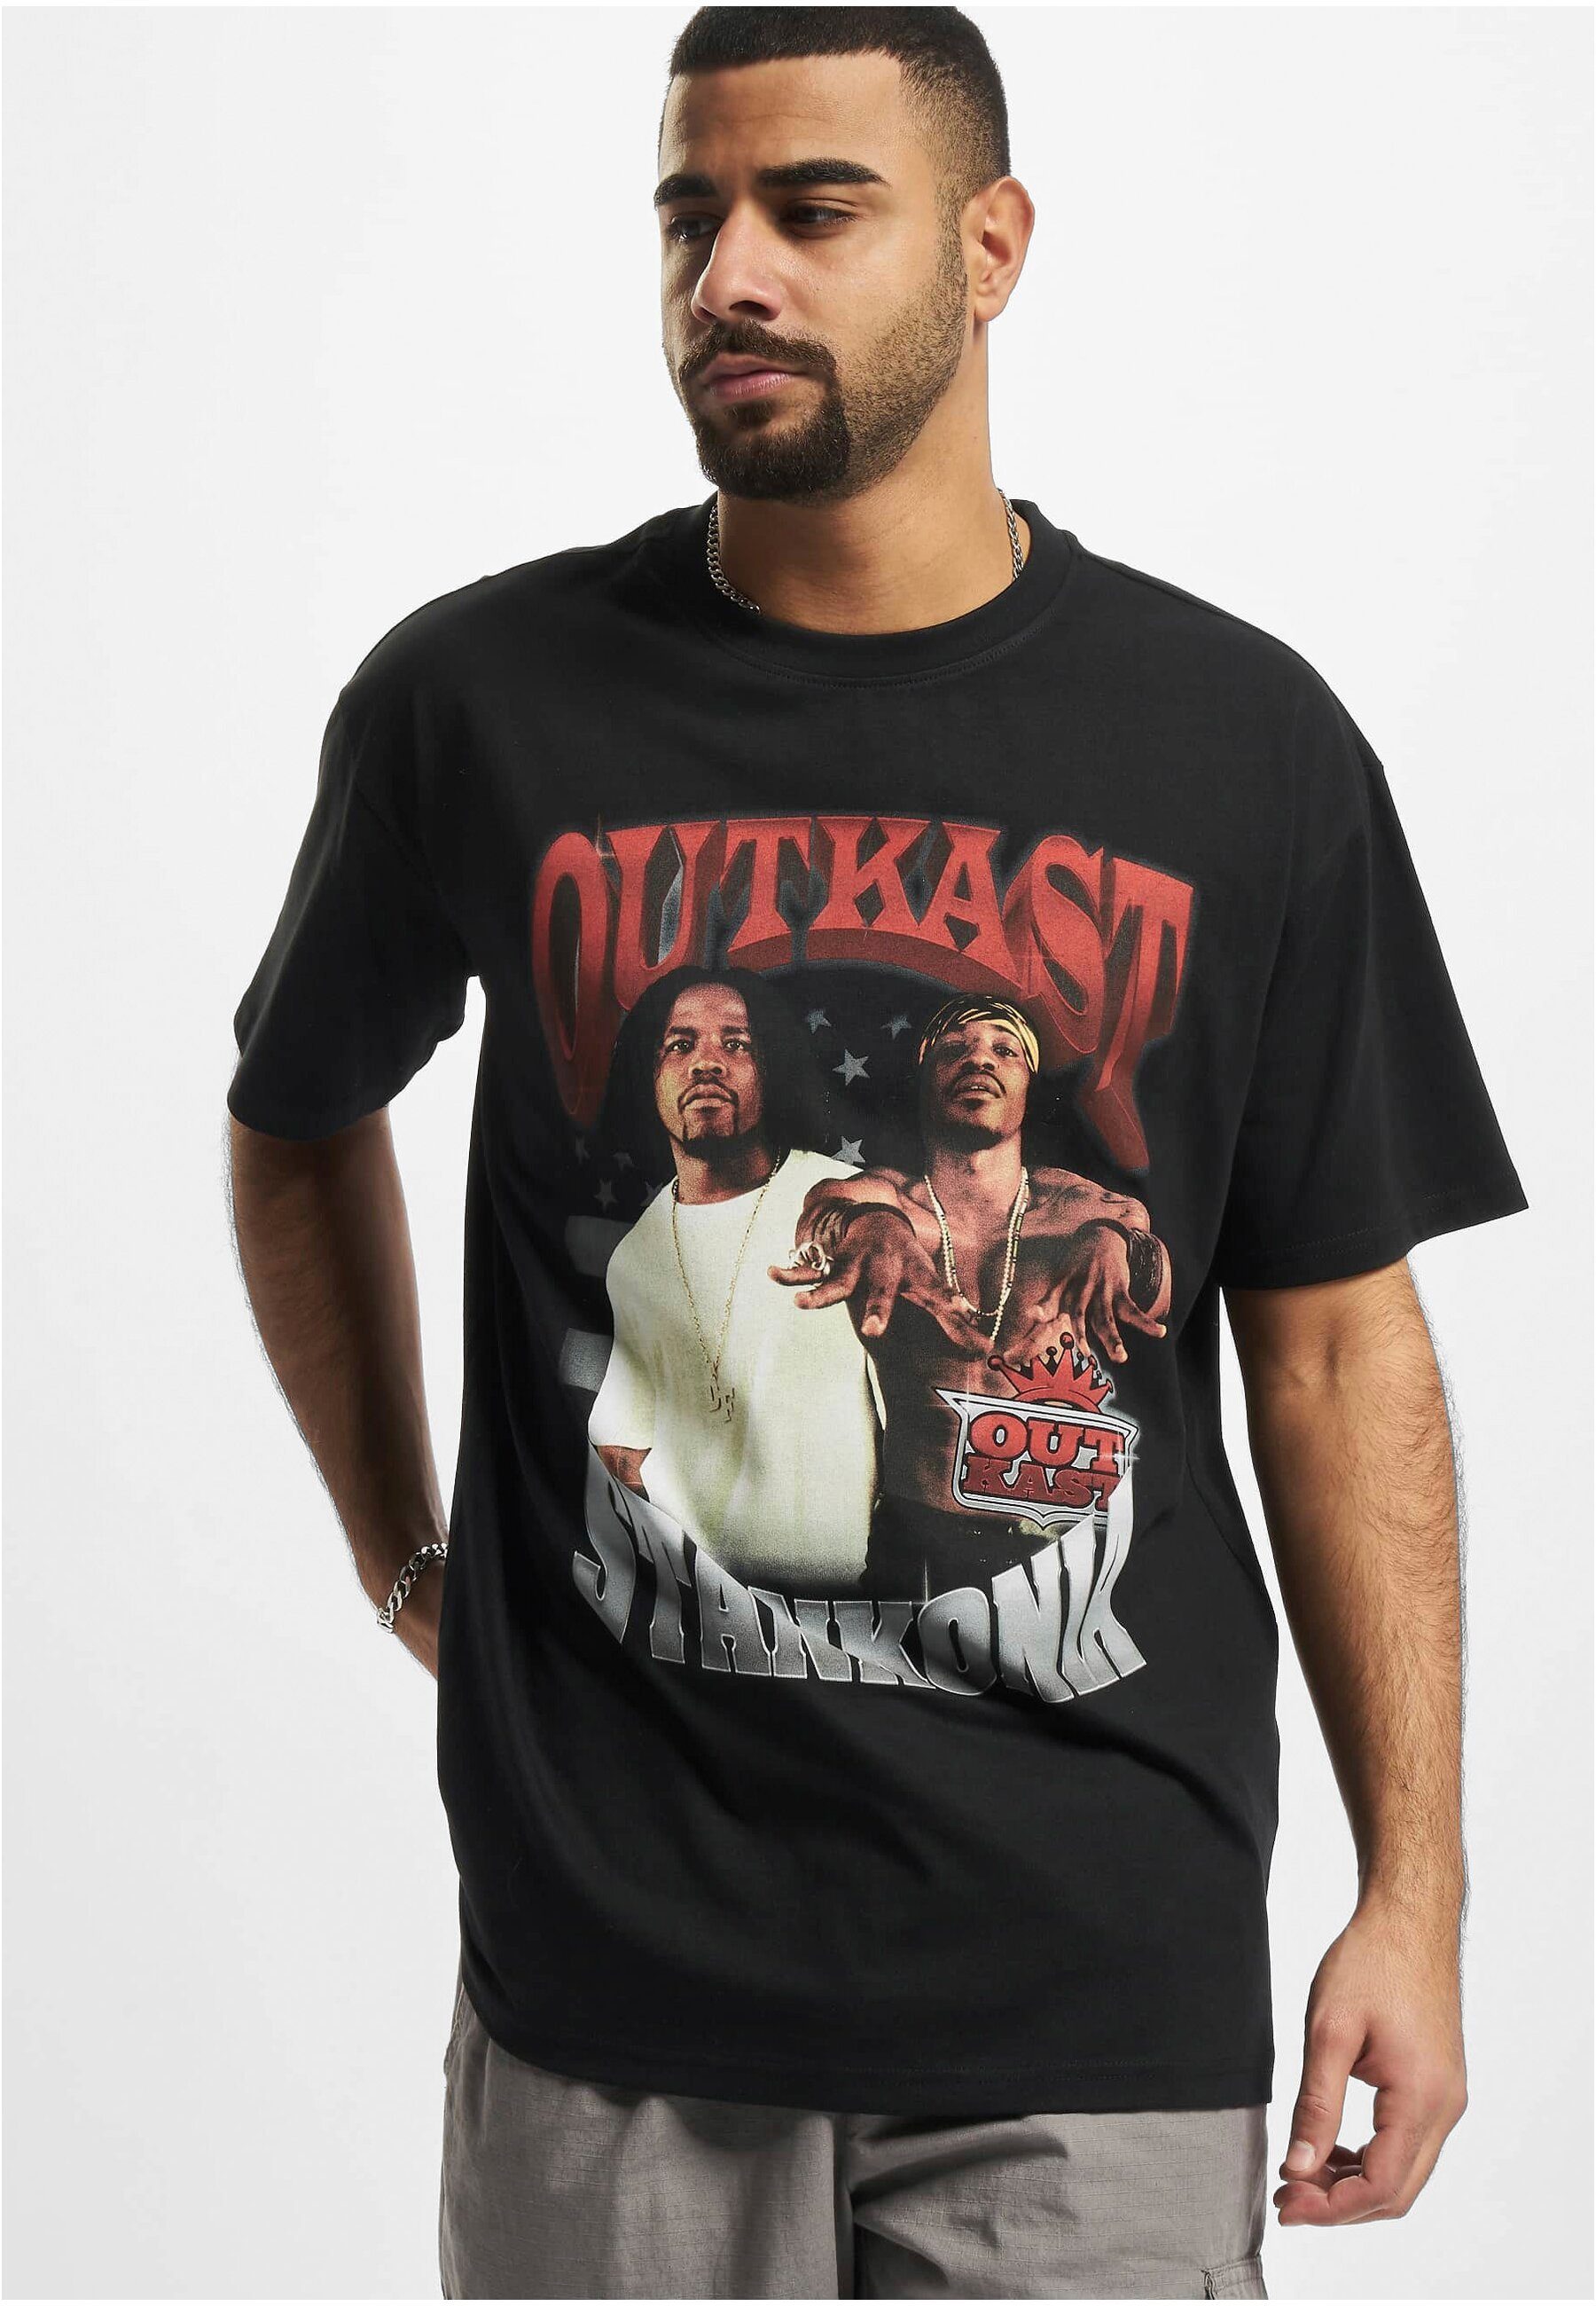 T-Shirt by Tee Herren Upscale Stankonia Oversize Outkast black Mister (1-tlg) Tee